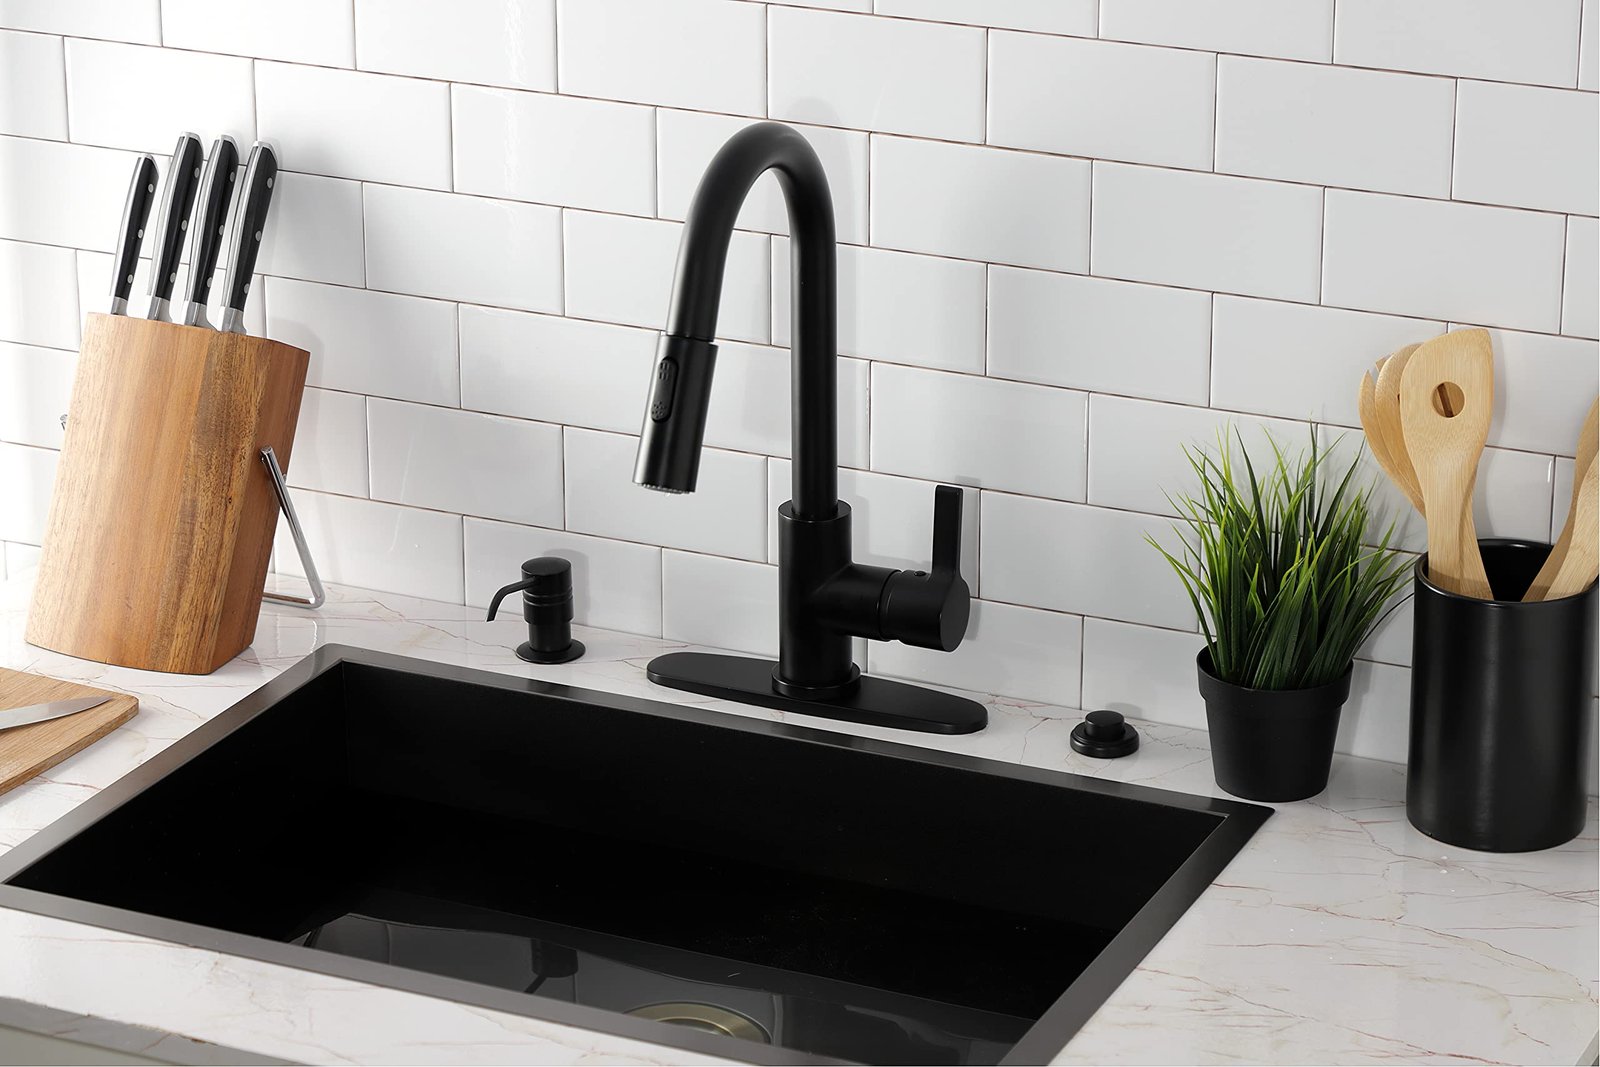 how to install a kitchen faucet without using the sprayer?